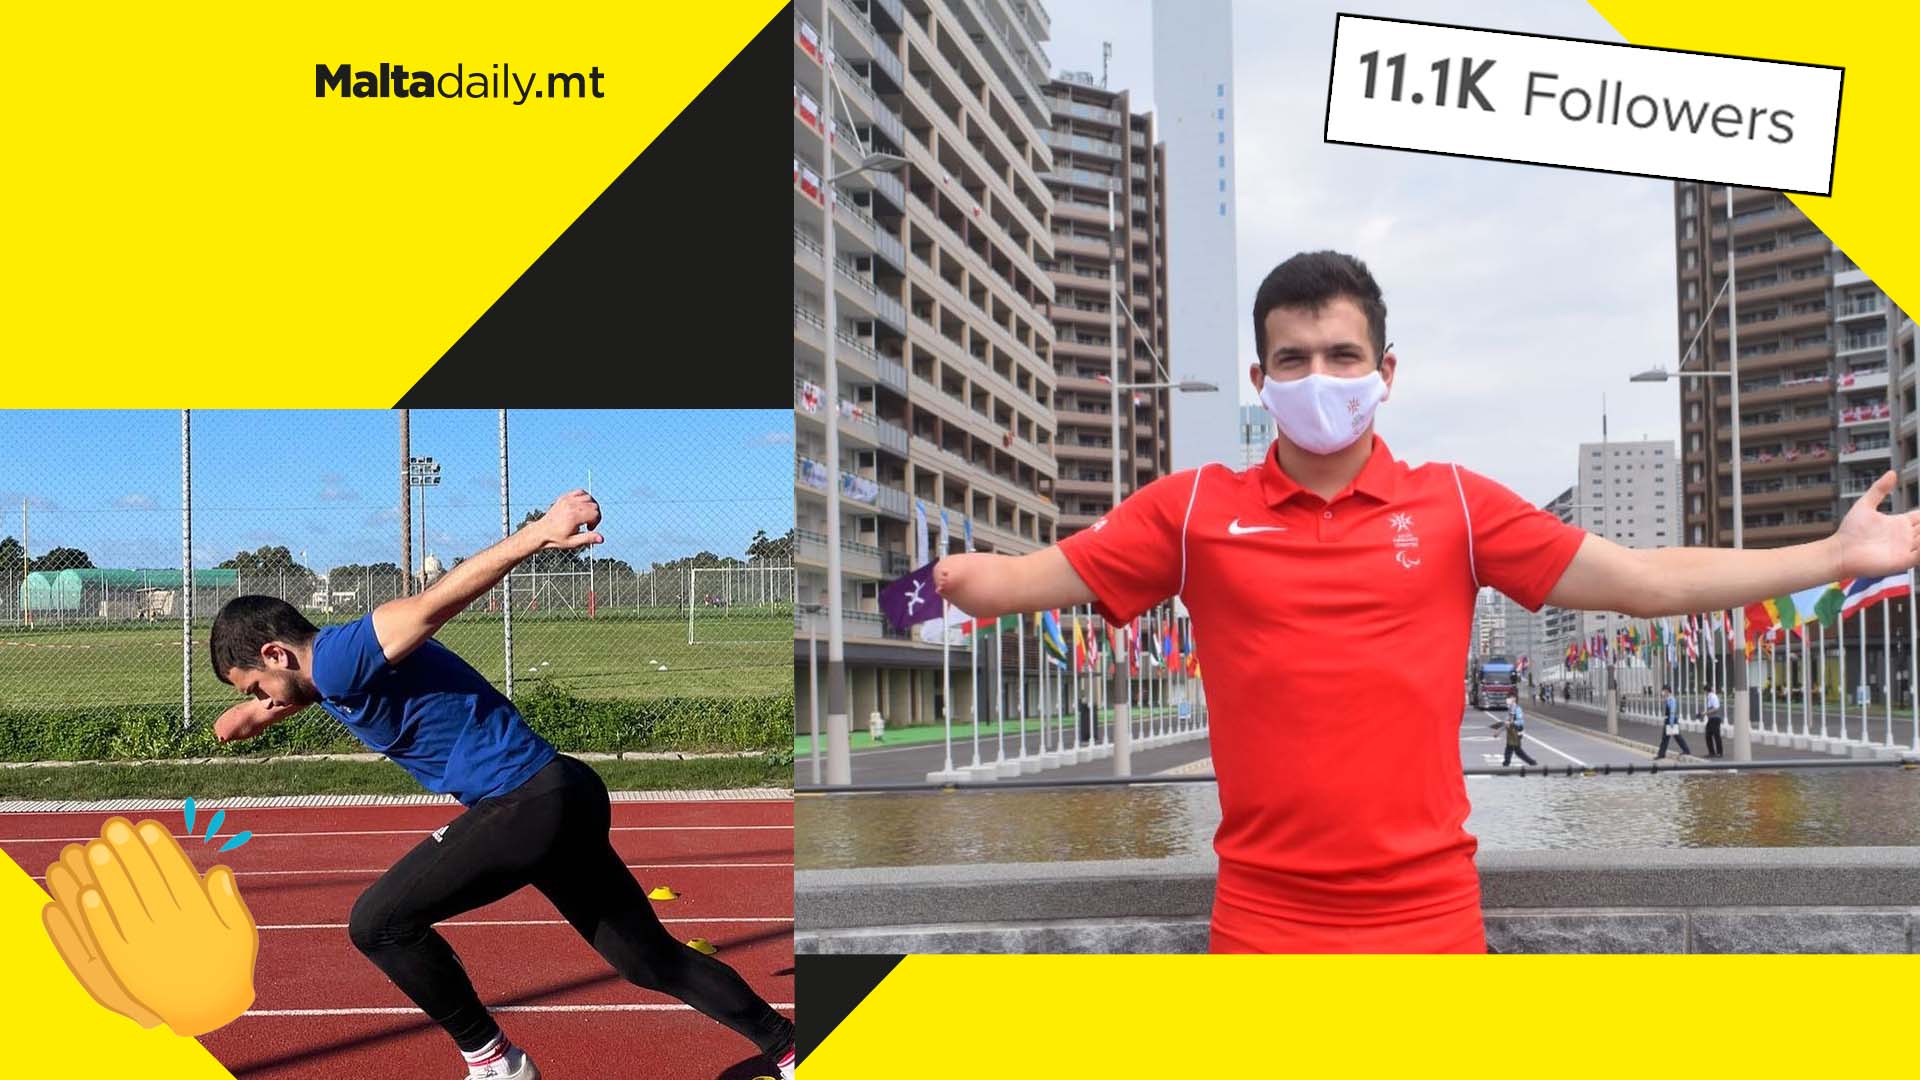 Para-athlete Thomas Borg shows us how he overcomes daily challenges on TikTok